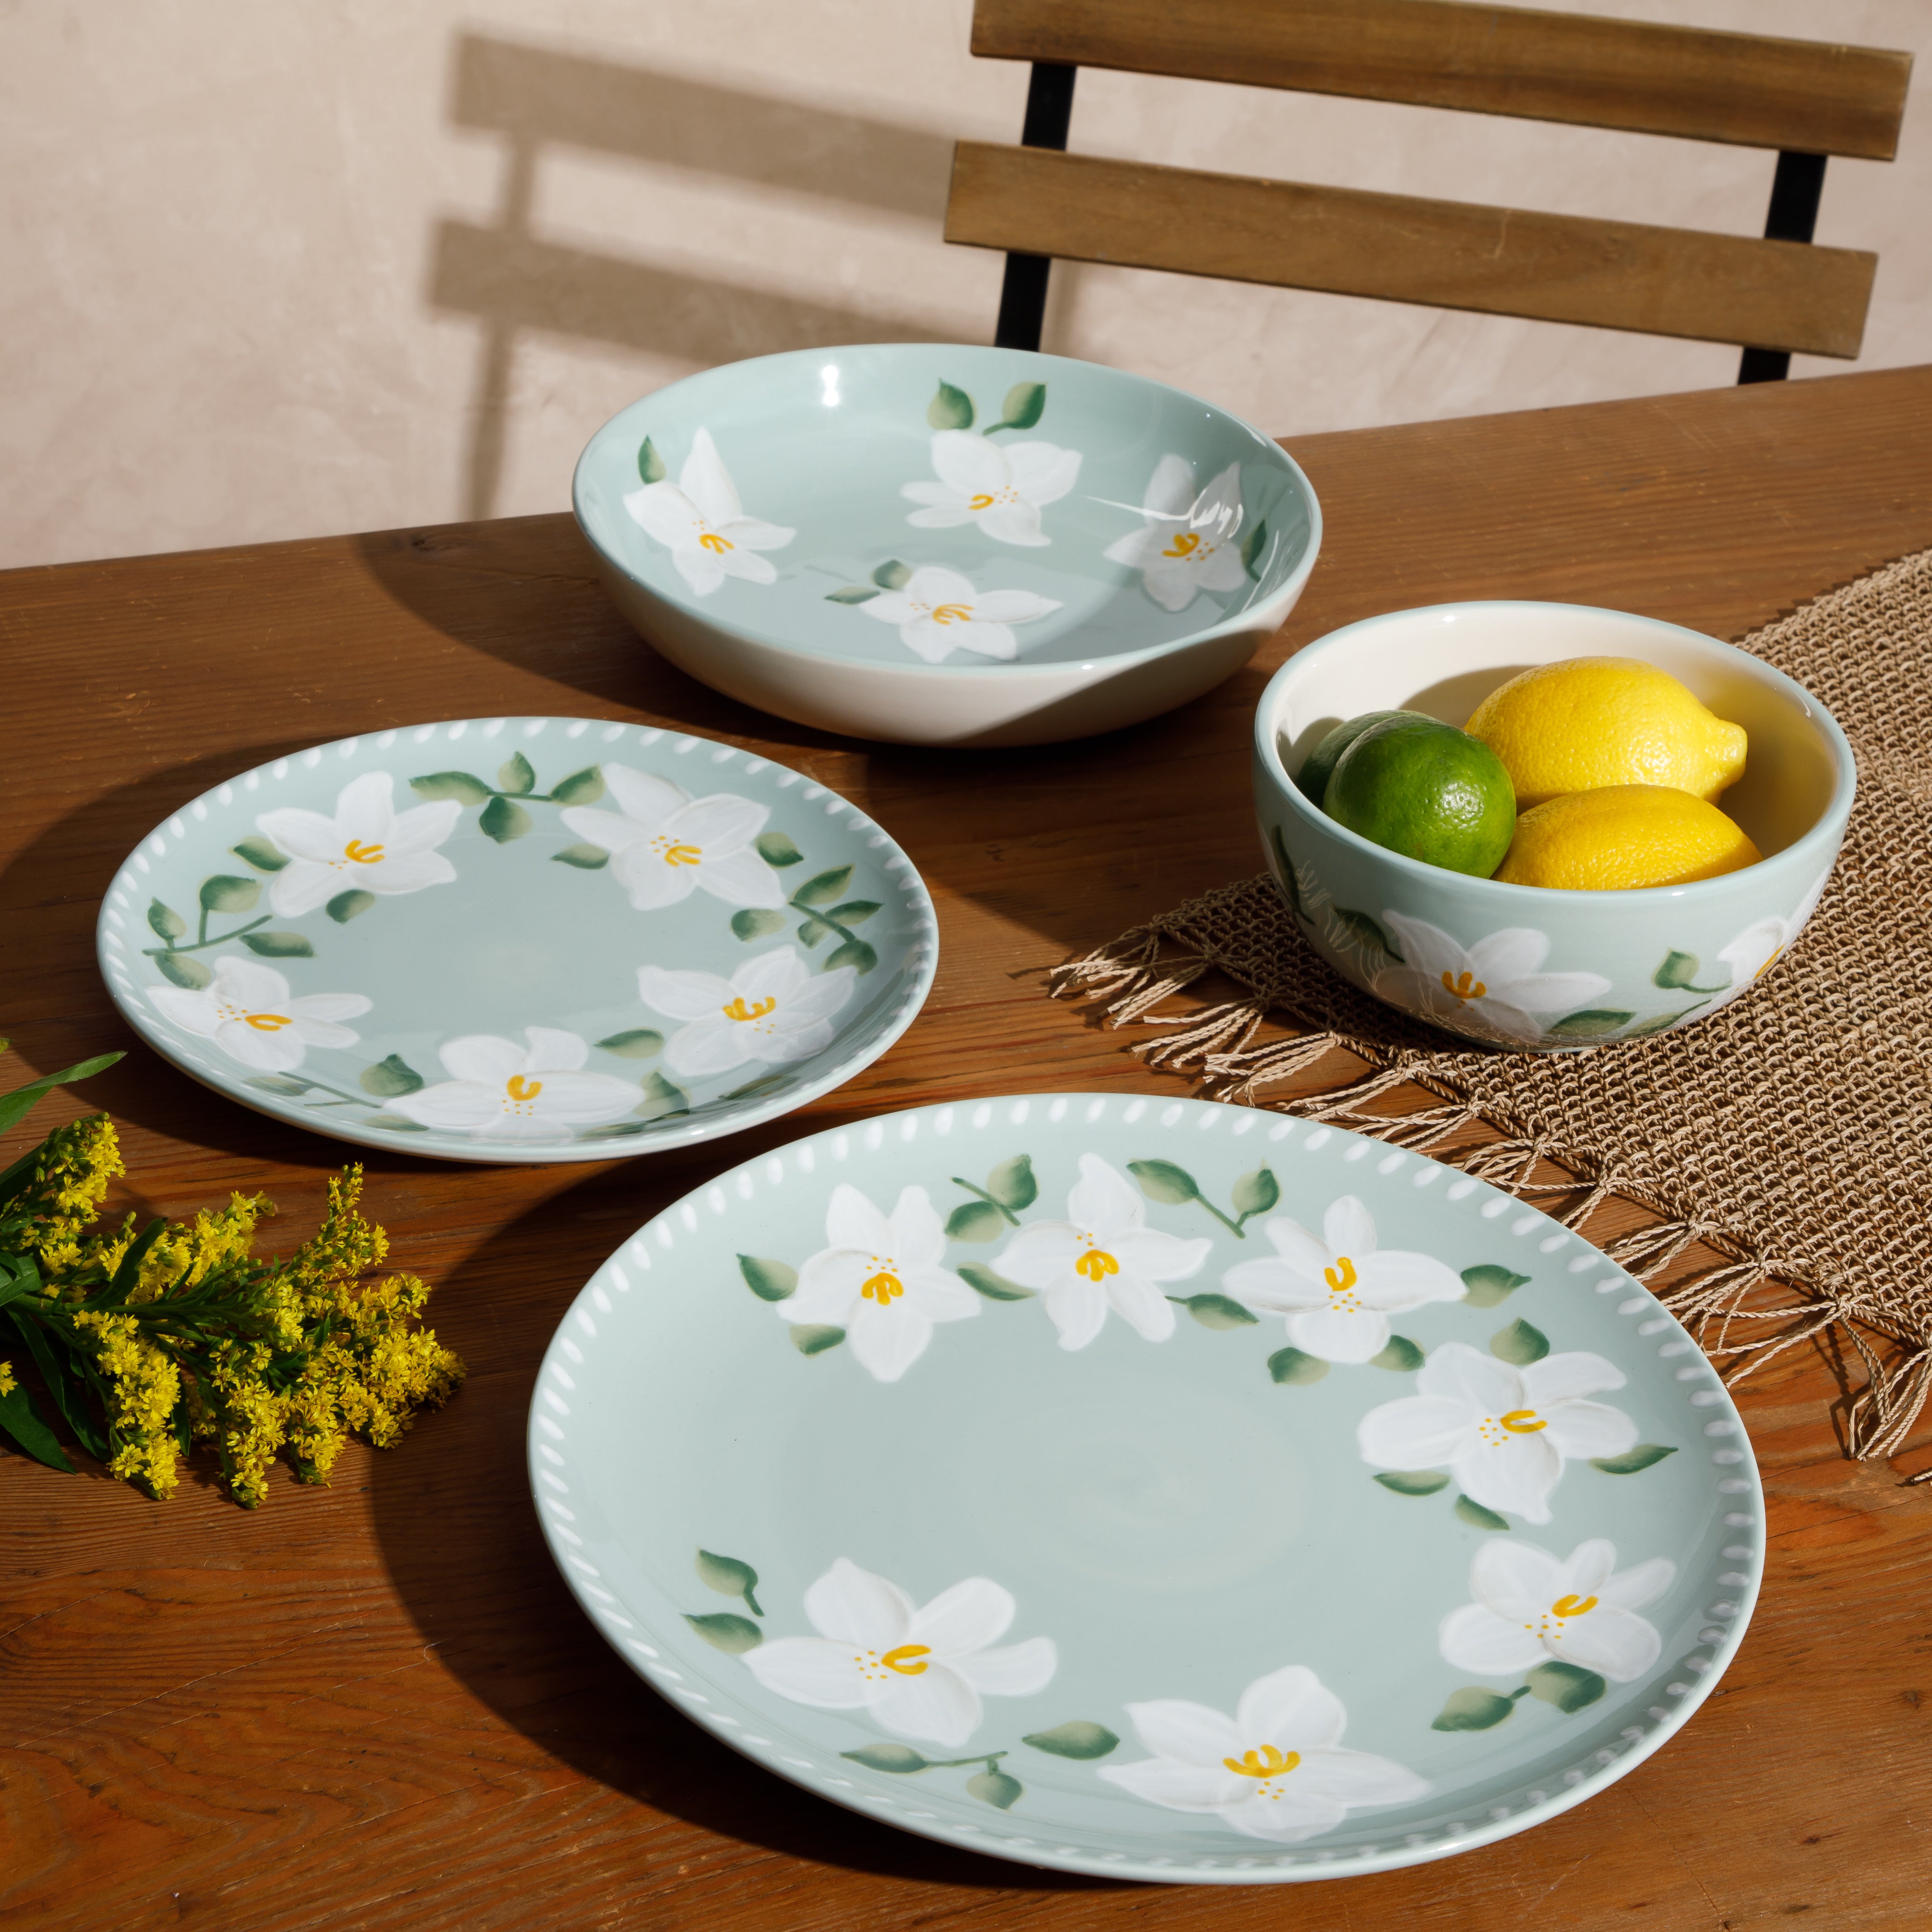 Bloomhouse Magnolia Bloom 16 Piece Double Bowl Hand Painted Stoneware Plates and Bowls Floral Dinnerware Set